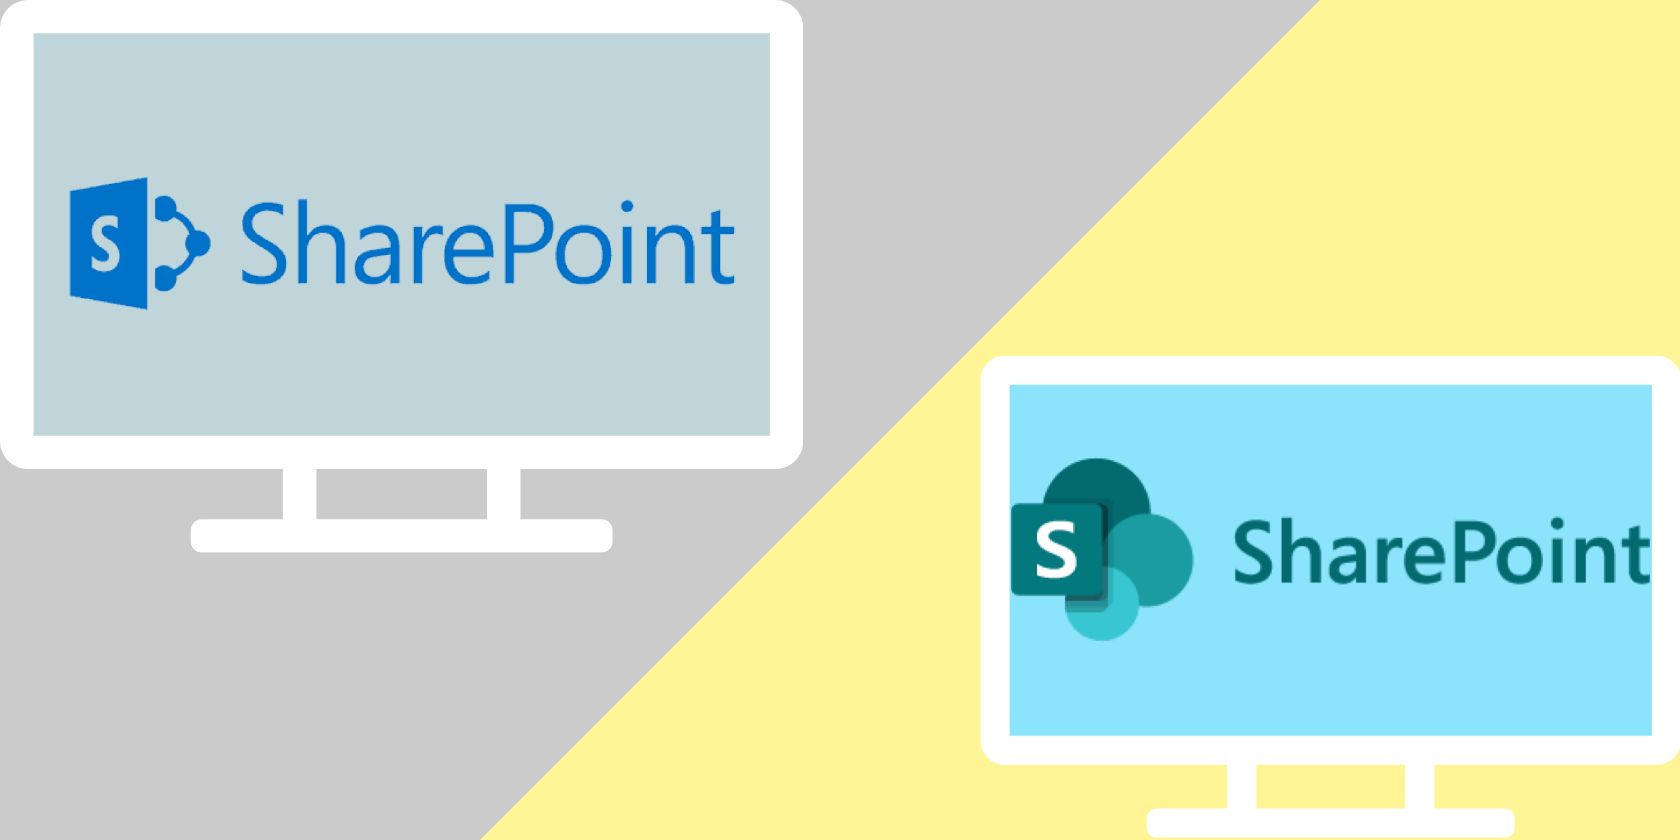 Illustration of two SharePoint versions